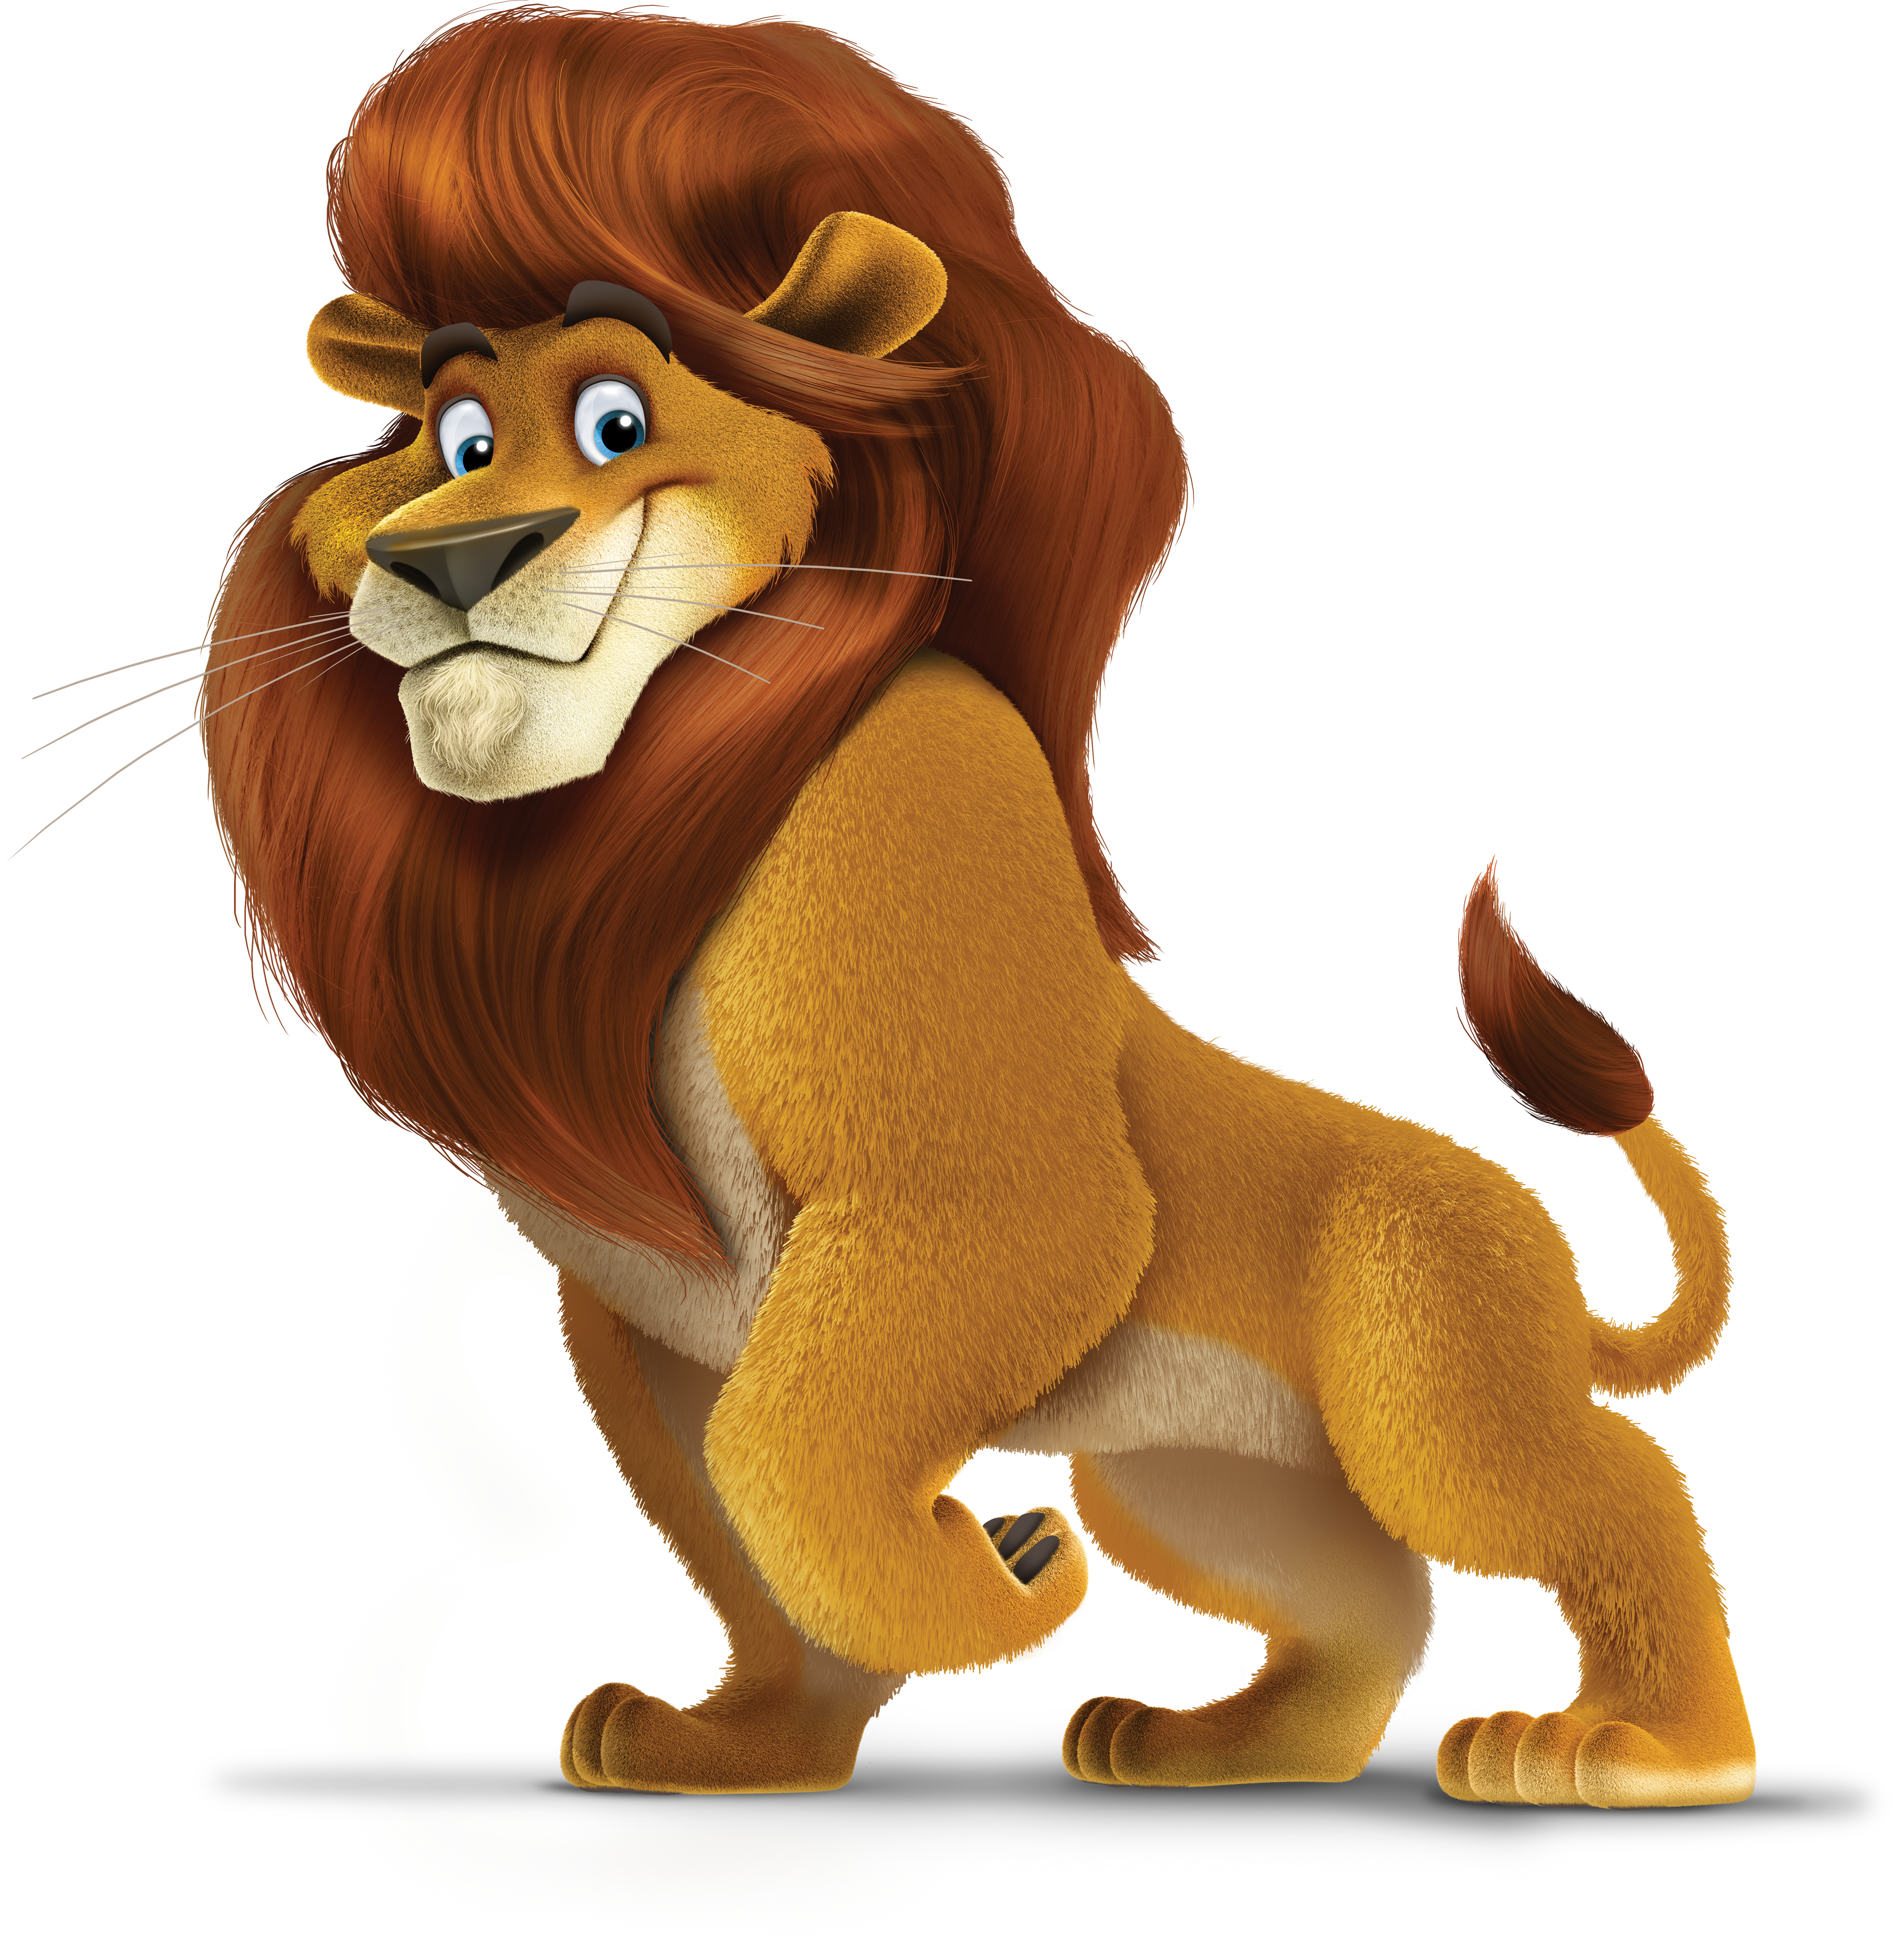 Lion clipart toy. Index of kingdomrock bible